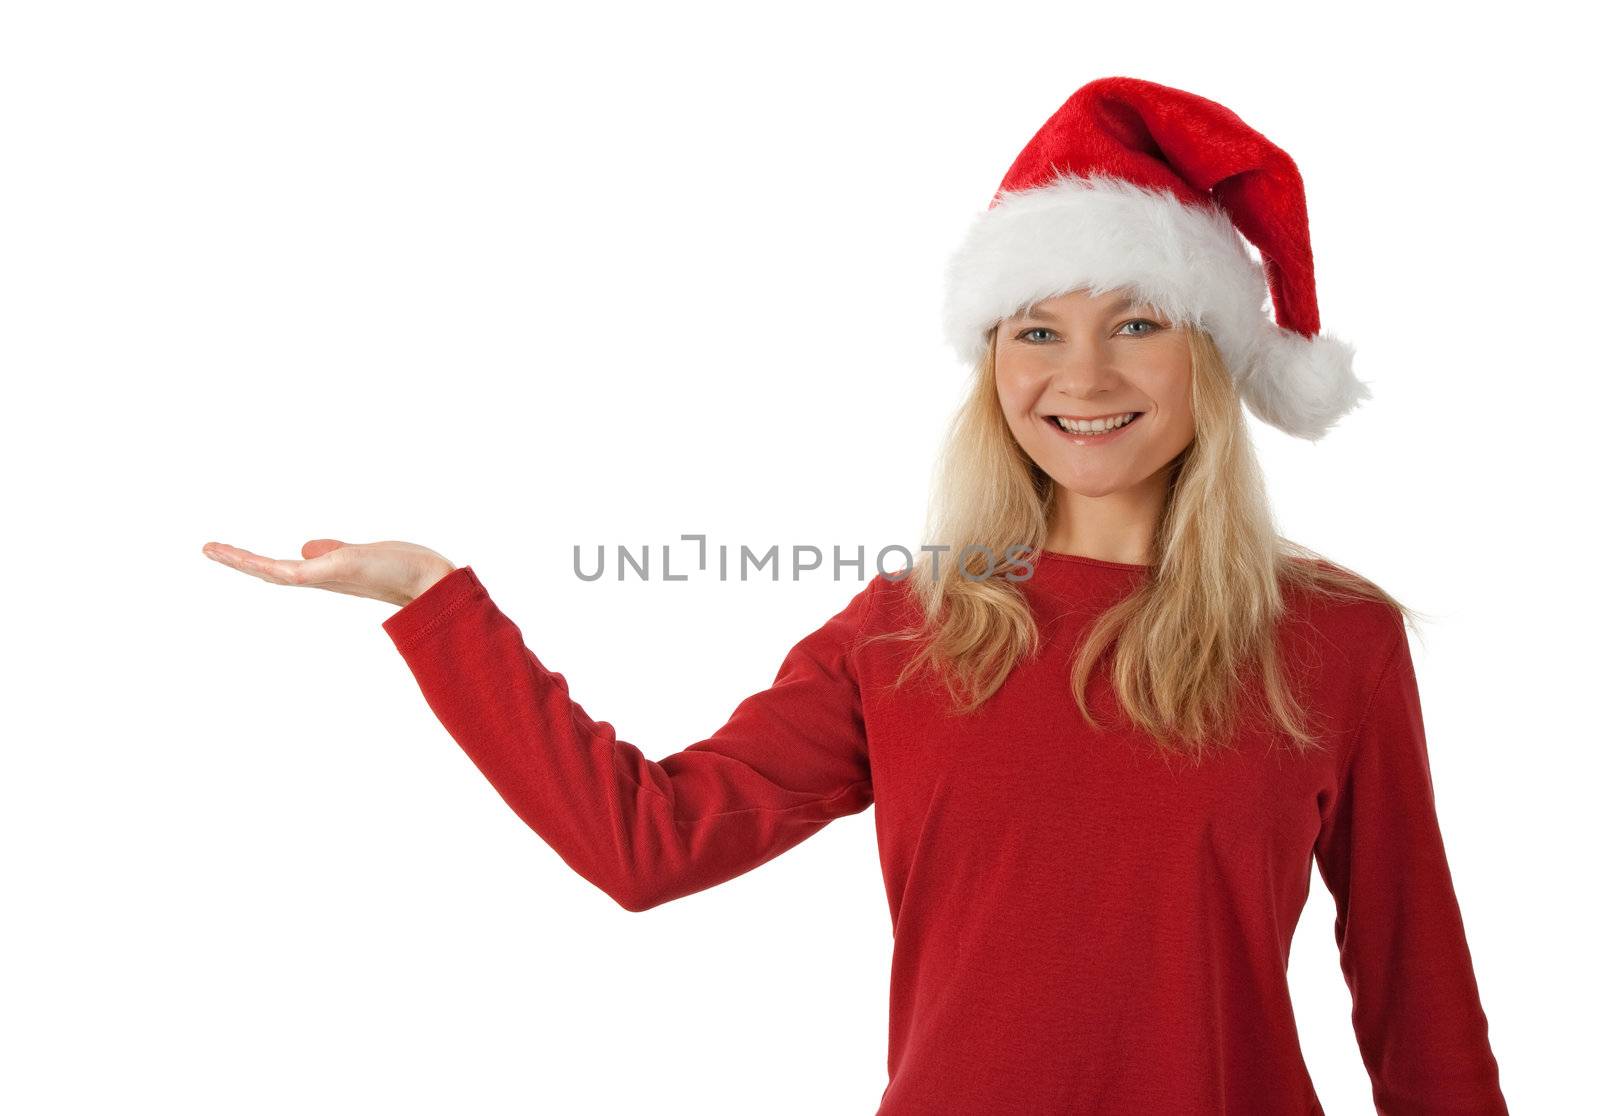 Santa girl wearing Christmas hat, holding hand palm up, ready to hold a present.